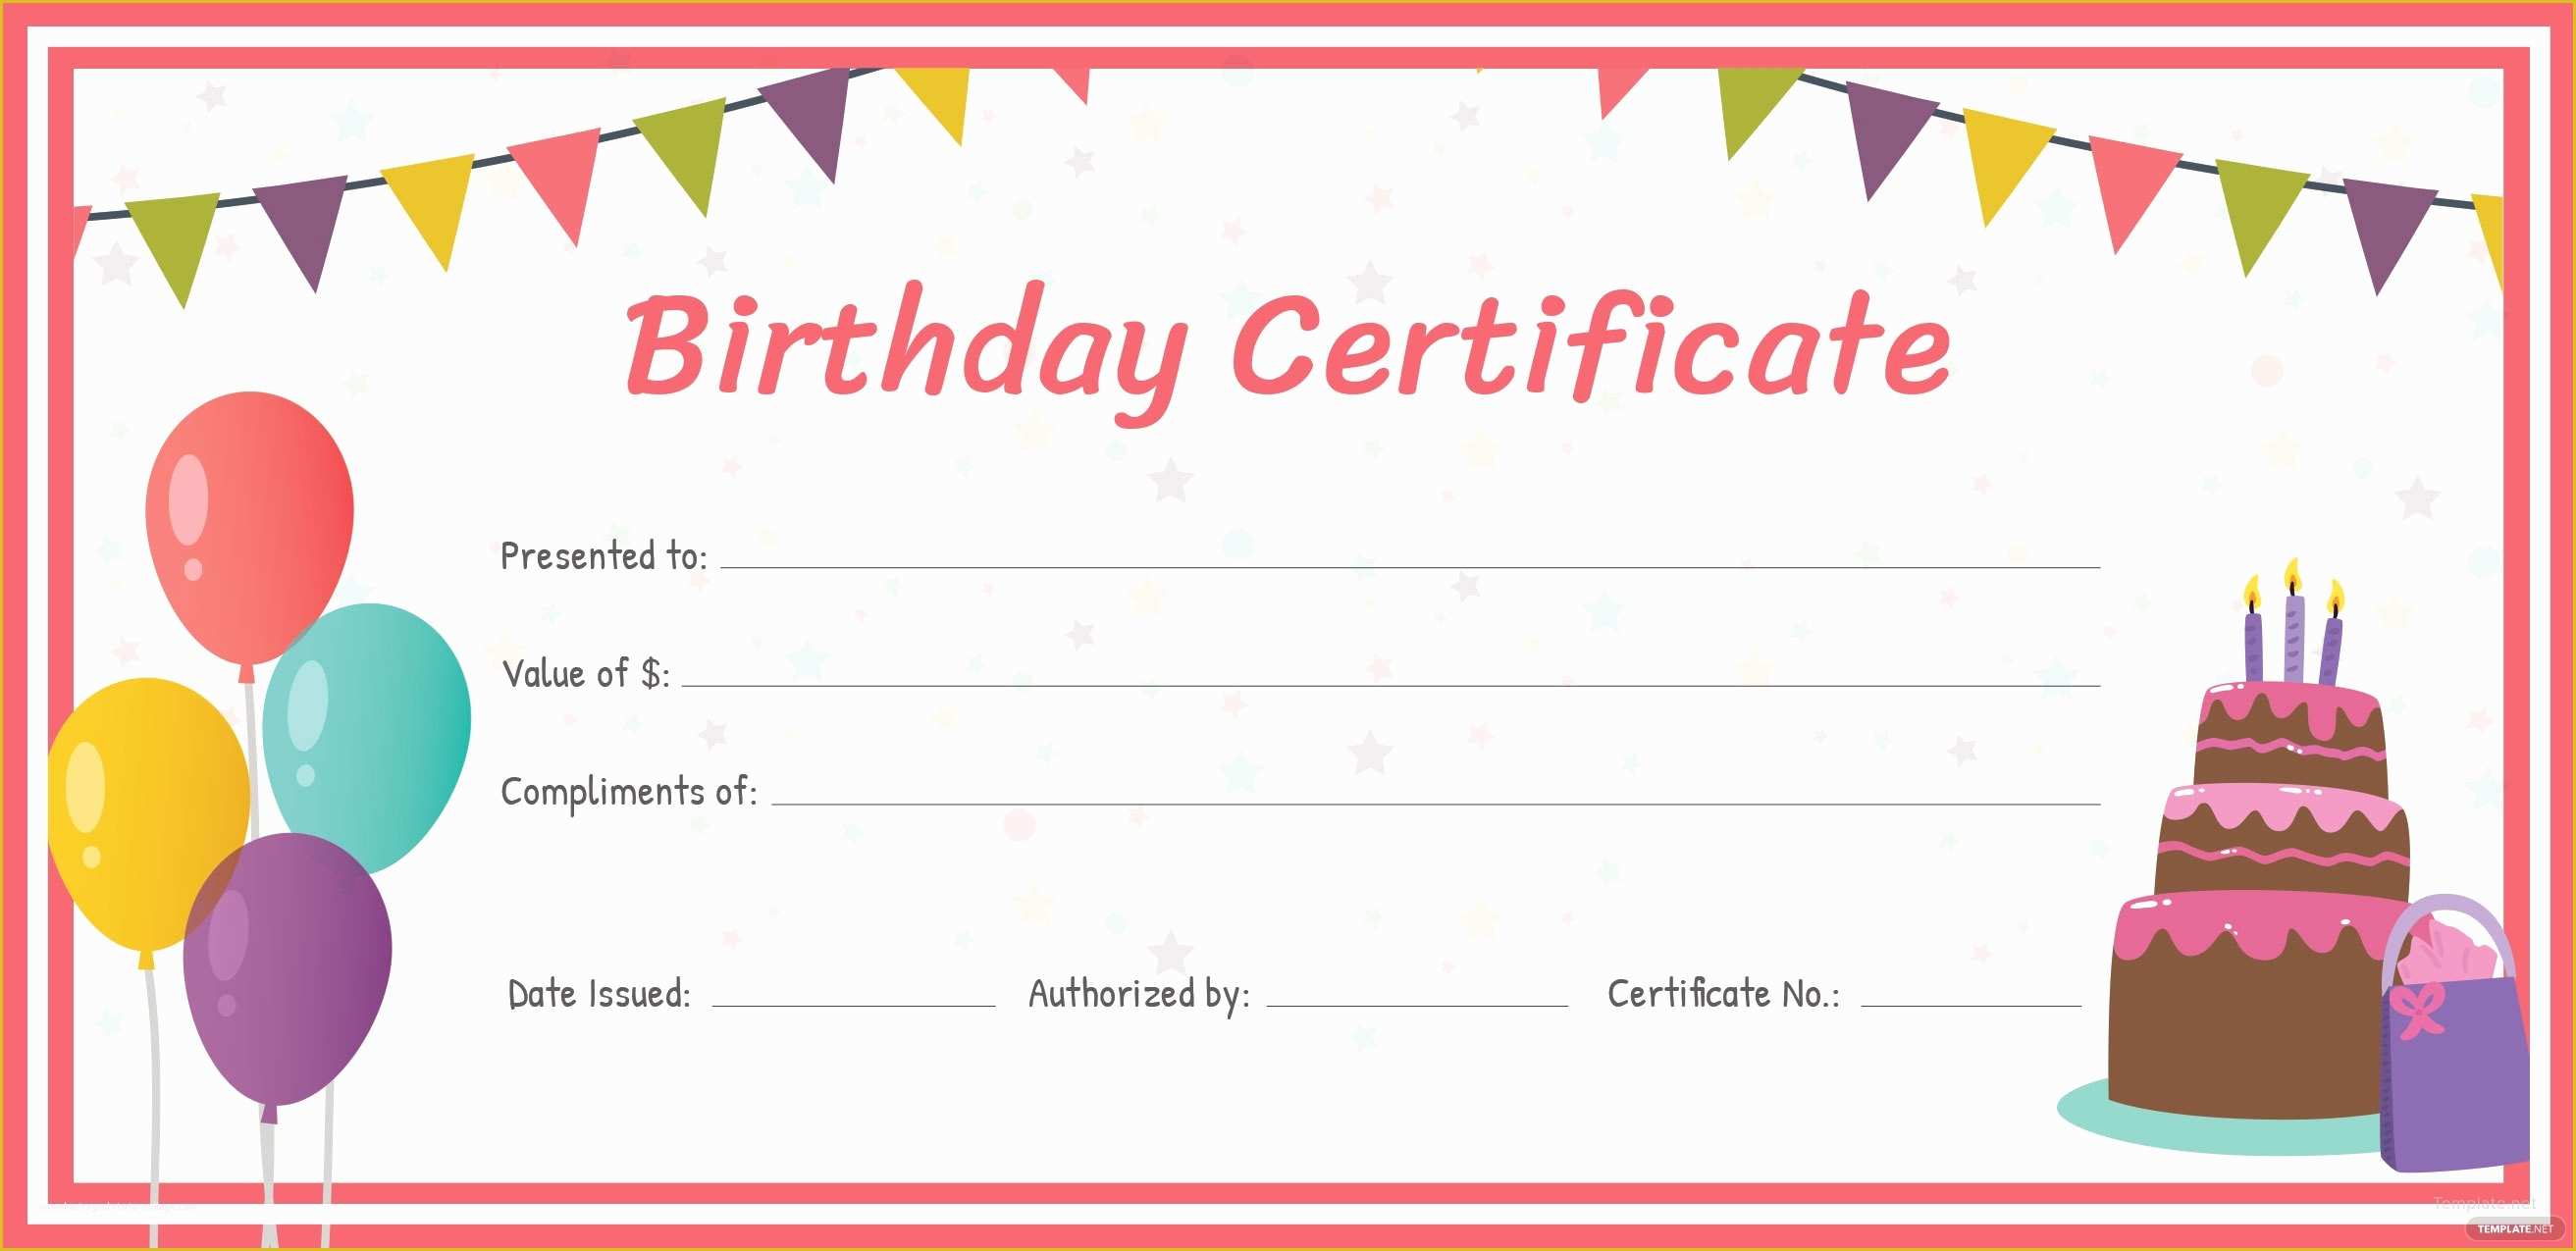 Free Download Gift Certificate Template for Mac Of Free Birthday Gift Certificate Template In Adobe